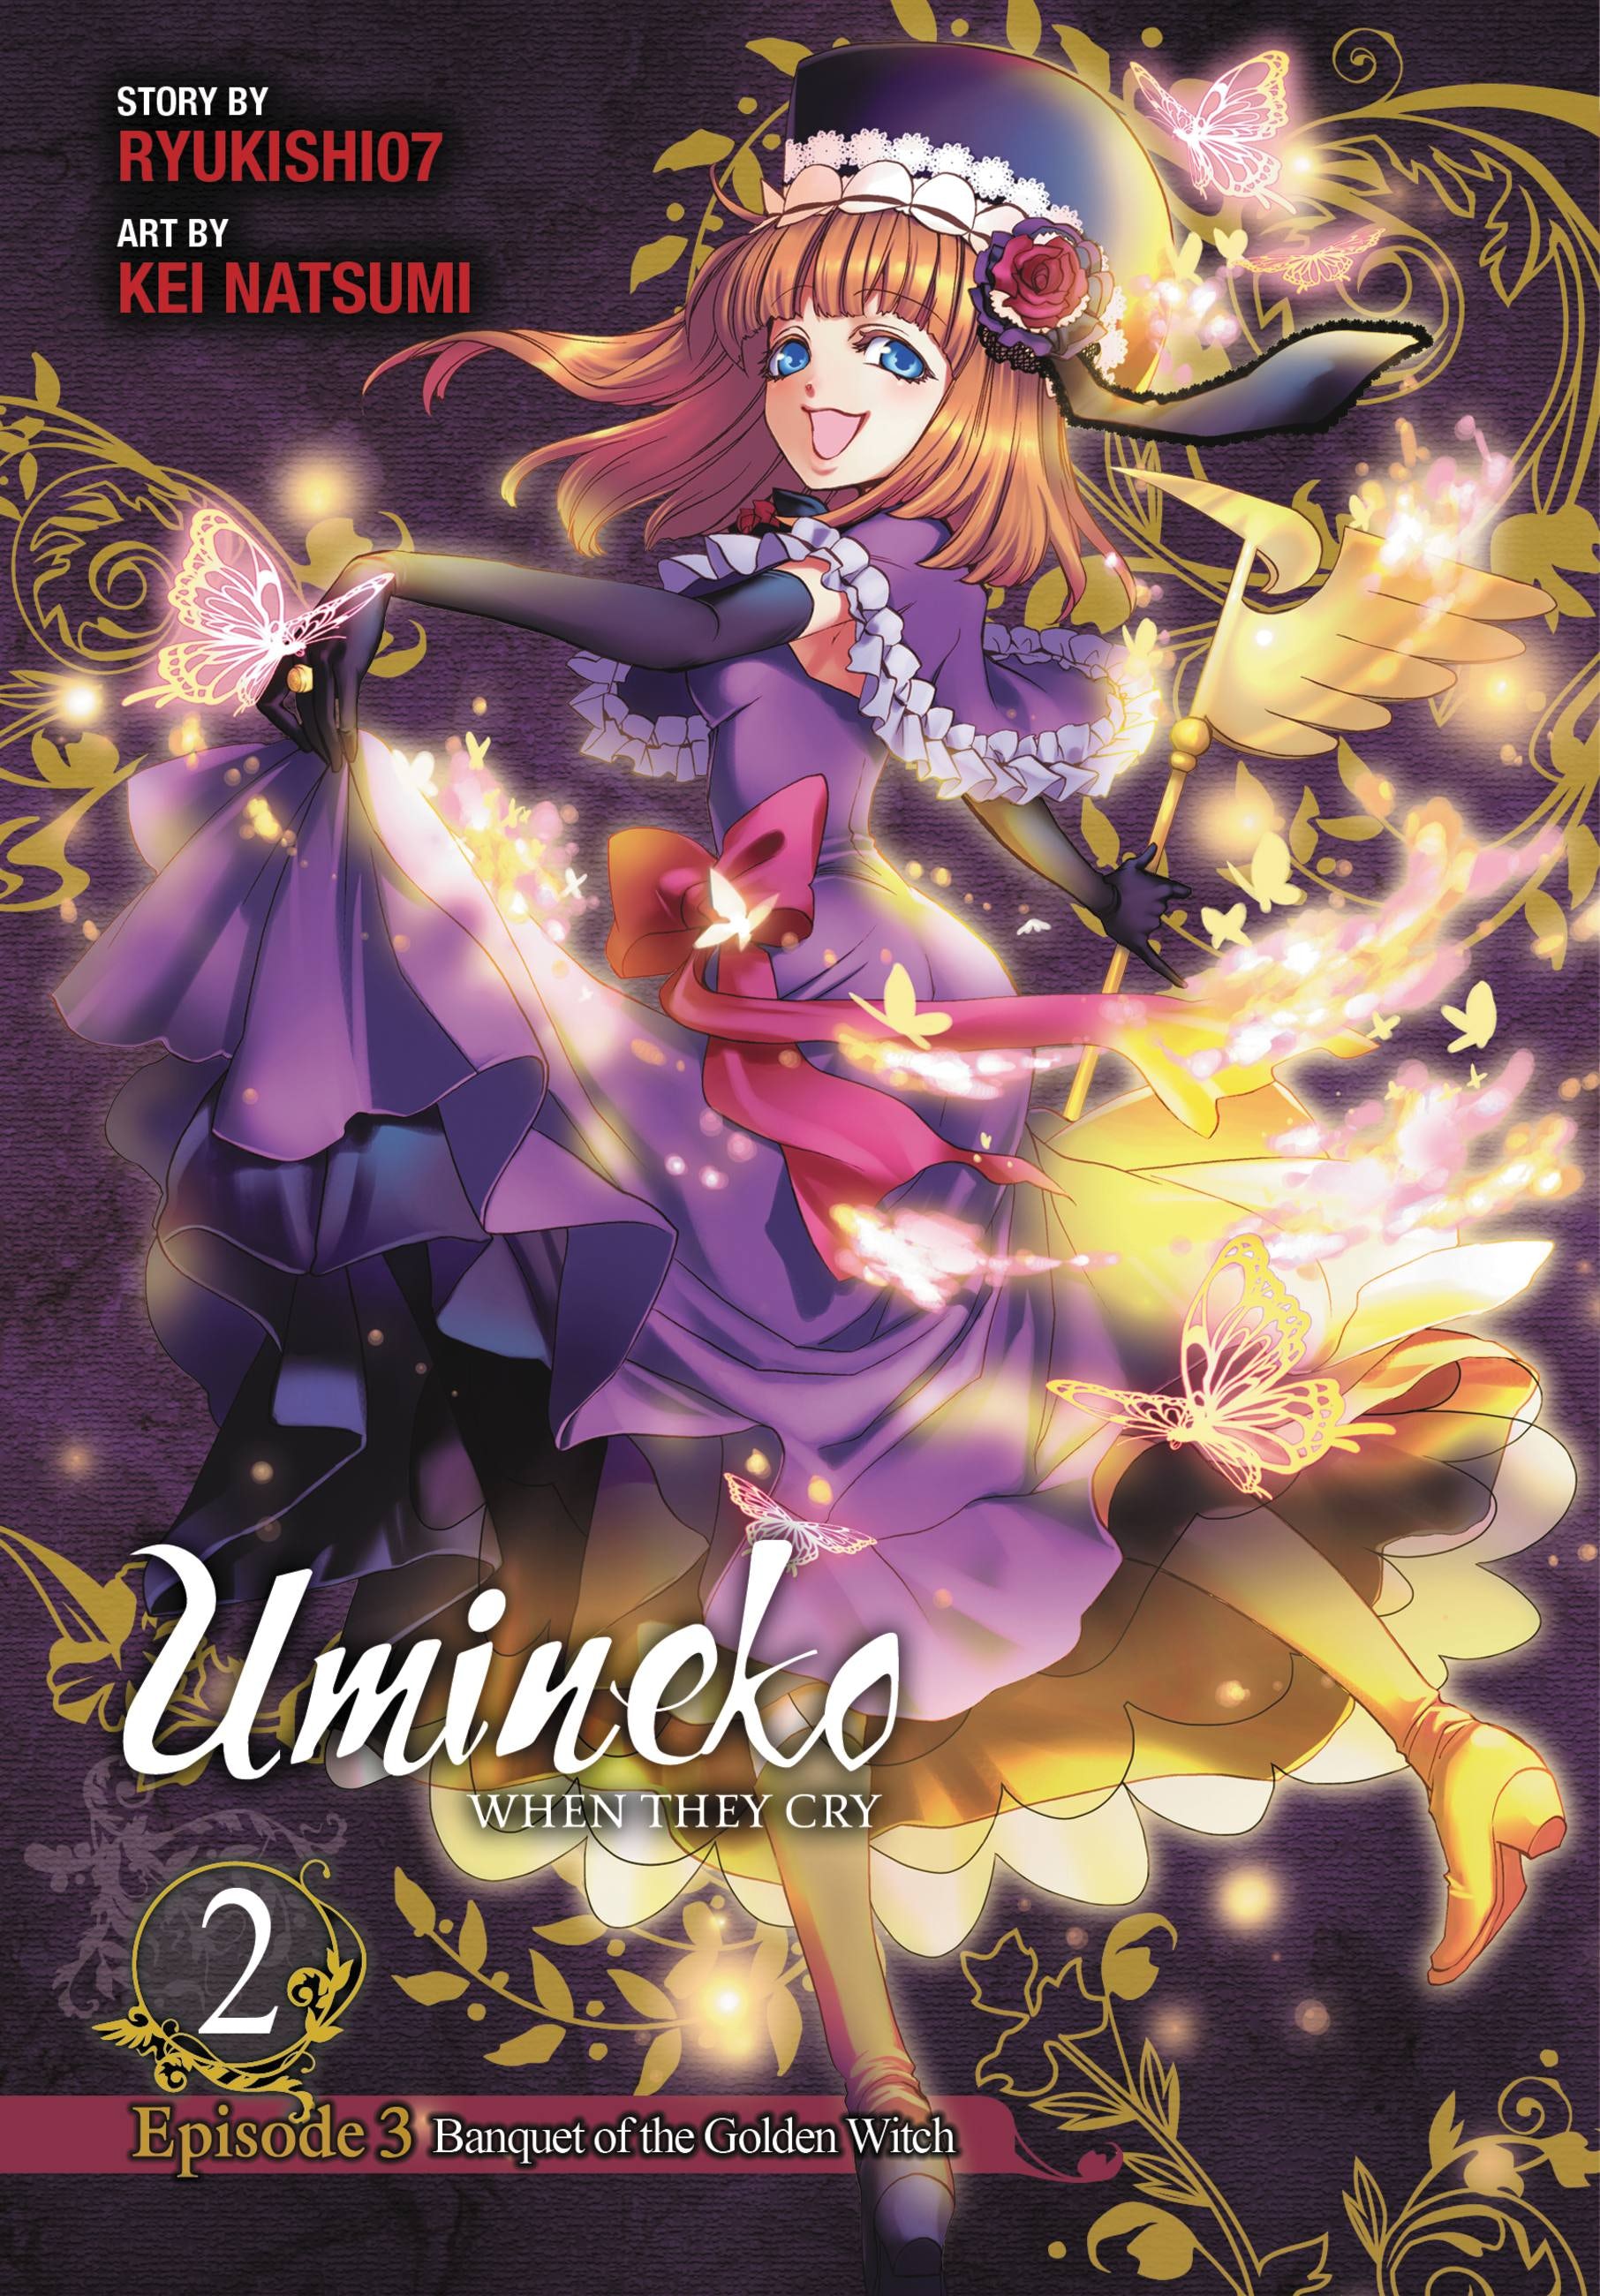 Product Image: Umineko WHEN THEY CRY Episode 3: Banquet of the Golden Witch, Vol. 2